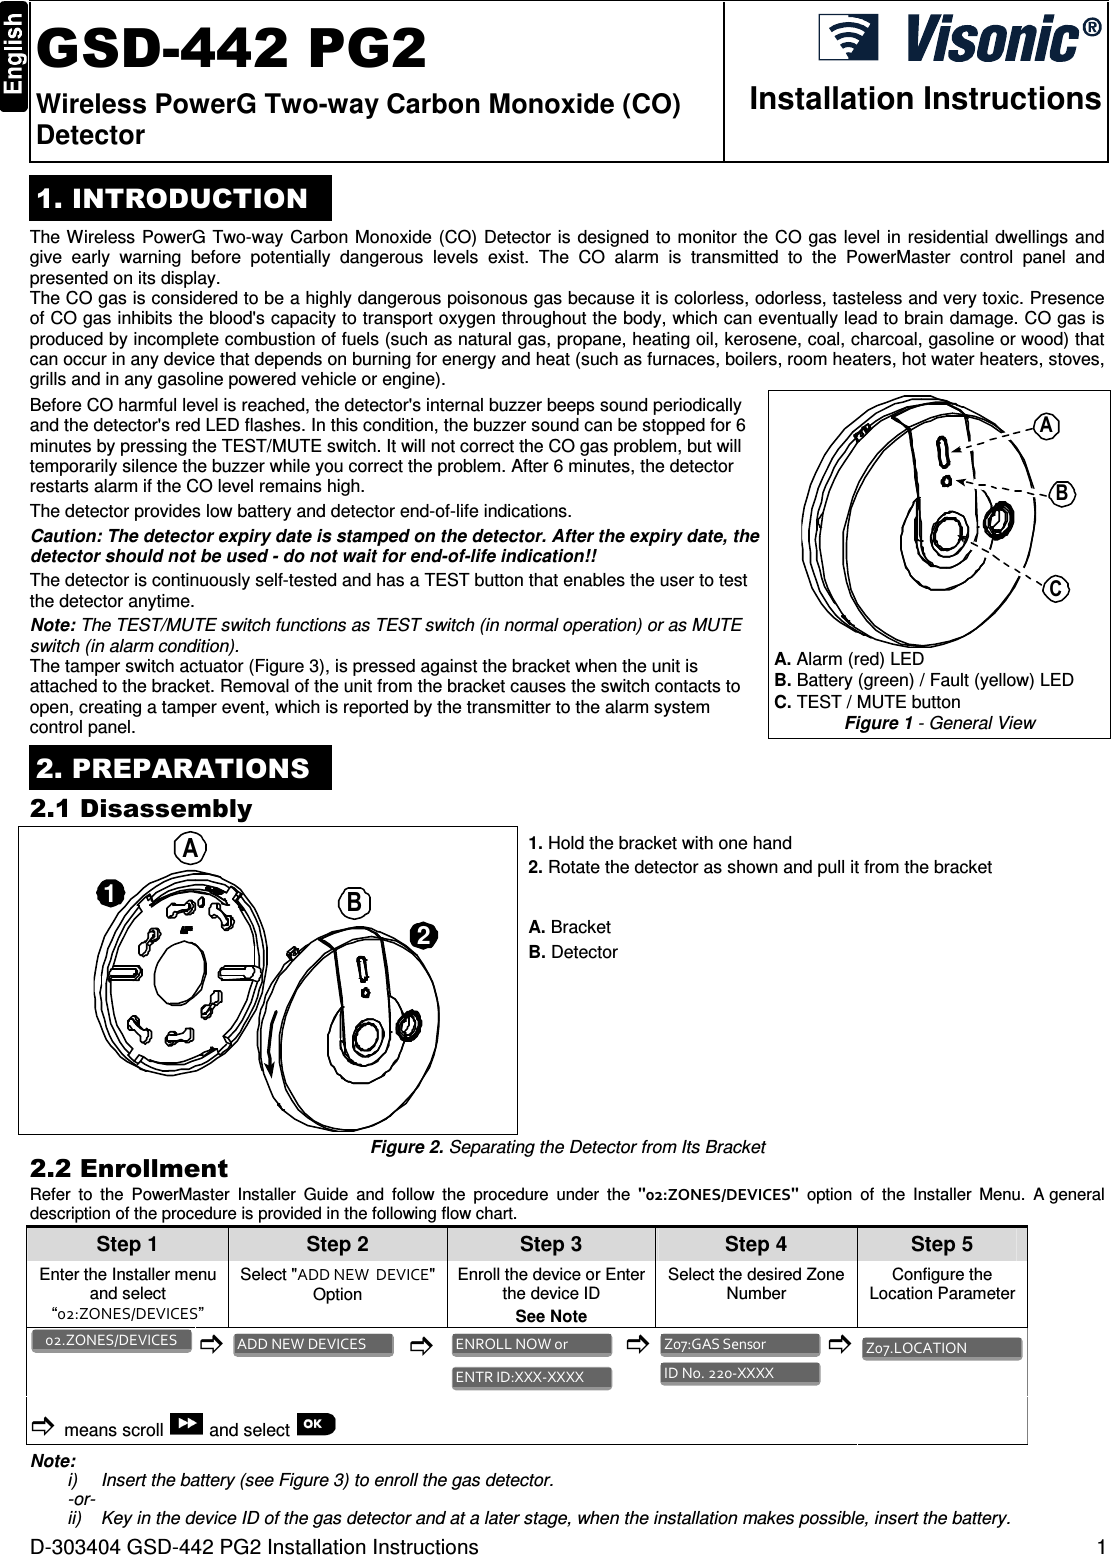 D-303404 GSD-442 PG2 Installation Instructions  1  GSD-442 PG2 Wireless PowerG Two-way Carbon Monoxide (CO) Detector  Installation Instructions 1. INTRODUCTION The Wireless PowerG Two-way Carbon Monoxide (CO) Detector is designed to monitor the CO gas level in residential dwellings and give  early  warning  before  potentially  dangerous  levels  exist.  The  CO  alarm  is  transmitted  to  the  PowerMaster  control  panel  and presented on its display. The CO gas is considered to be a highly dangerous poisonous gas because it is colorless, odorless, tasteless and very toxic. Presence of CO gas inhibits the blood&apos;s capacity to transport oxygen throughout the body, which can eventually lead to brain damage. CO gas is produced by incomplete combustion of fuels (such as natural gas, propane, heating oil, kerosene, coal, charcoal, gasoline or wood) that can occur in any device that depends on burning for energy and heat (such as furnaces, boilers, room heaters, hot water heaters, stoves, grills and in any gasoline powered vehicle or engine).  Before CO harmful level is reached, the detector&apos;s internal buzzer beeps sound periodically and the detector&apos;s red LED flashes. In this condition, the buzzer sound can be stopped for 6 minutes by pressing the TEST/MUTE switch. It will not correct the CO gas problem, but will temporarily silence the buzzer while you correct the problem. After 6 minutes, the detector restarts alarm if the CO level remains high. The detector provides low battery and detector end-of-life indications. Caution: The detector expiry date is stamped on the detector. After the expiry date, the detector should not be used - do not wait for end-of-life indication!! The detector is continuously self-tested and has a TEST button that enables the user to test the detector anytime. Note: The TEST/MUTE switch functions as TEST switch (in normal operation) or as MUTE switch (in alarm condition). The tamper switch actuator (Figure 3), is pressed against the bracket when the unit is attached to the bracket. Removal of the unit from the bracket causes the switch contacts to open, creating a tamper event, which is reported by the transmitter to the alarm system control panel. ABC A. Alarm (red) LED  B. Battery (green) / Fault (yellow) LED  C. TEST / MUTE button Figure 1 - General View 2. PREPARATIONS 2.1 Disassembly 12AB 1. Hold the bracket with one hand 2. Rotate the detector as shown and pull it from the bracket A. Bracket B. Detector Figure 2. Separating the Detector from Its Bracket 2.2 Enrollment Refer  to  the  PowerMaster  Installer  Guide  and  follow  the  procedure  under  the  &quot;02:ZONES/DEVICES&quot;  option  of  the  Installer  Menu.  A general description of the procedure is provided in the following flow chart. Step 1 Step 2 Step 3 Step 4    Step 5 Enter the Installer menu and select “02:ZONES/DEVICES” Select &quot;ADD NEW  DEVICE&quot; Option  Enroll the device or Enter the device ID See Note Select the desired Zone Number  Configure the Location Parameter              means scroll   and select           Note: i)  Insert the battery (see Figure 3) to enroll the gas detector. -or- ii)  Key in the device ID of the gas detector and at a later stage, when the installation makes possible, insert the battery. Z07.LOCATION  ID No. 220-XXXX  Z07:GAS Sensor  ENTR ID:XXX-XXXX  ENROLL NOW or  ADD NEW DEVICES  02.ZONES/DEVICES  